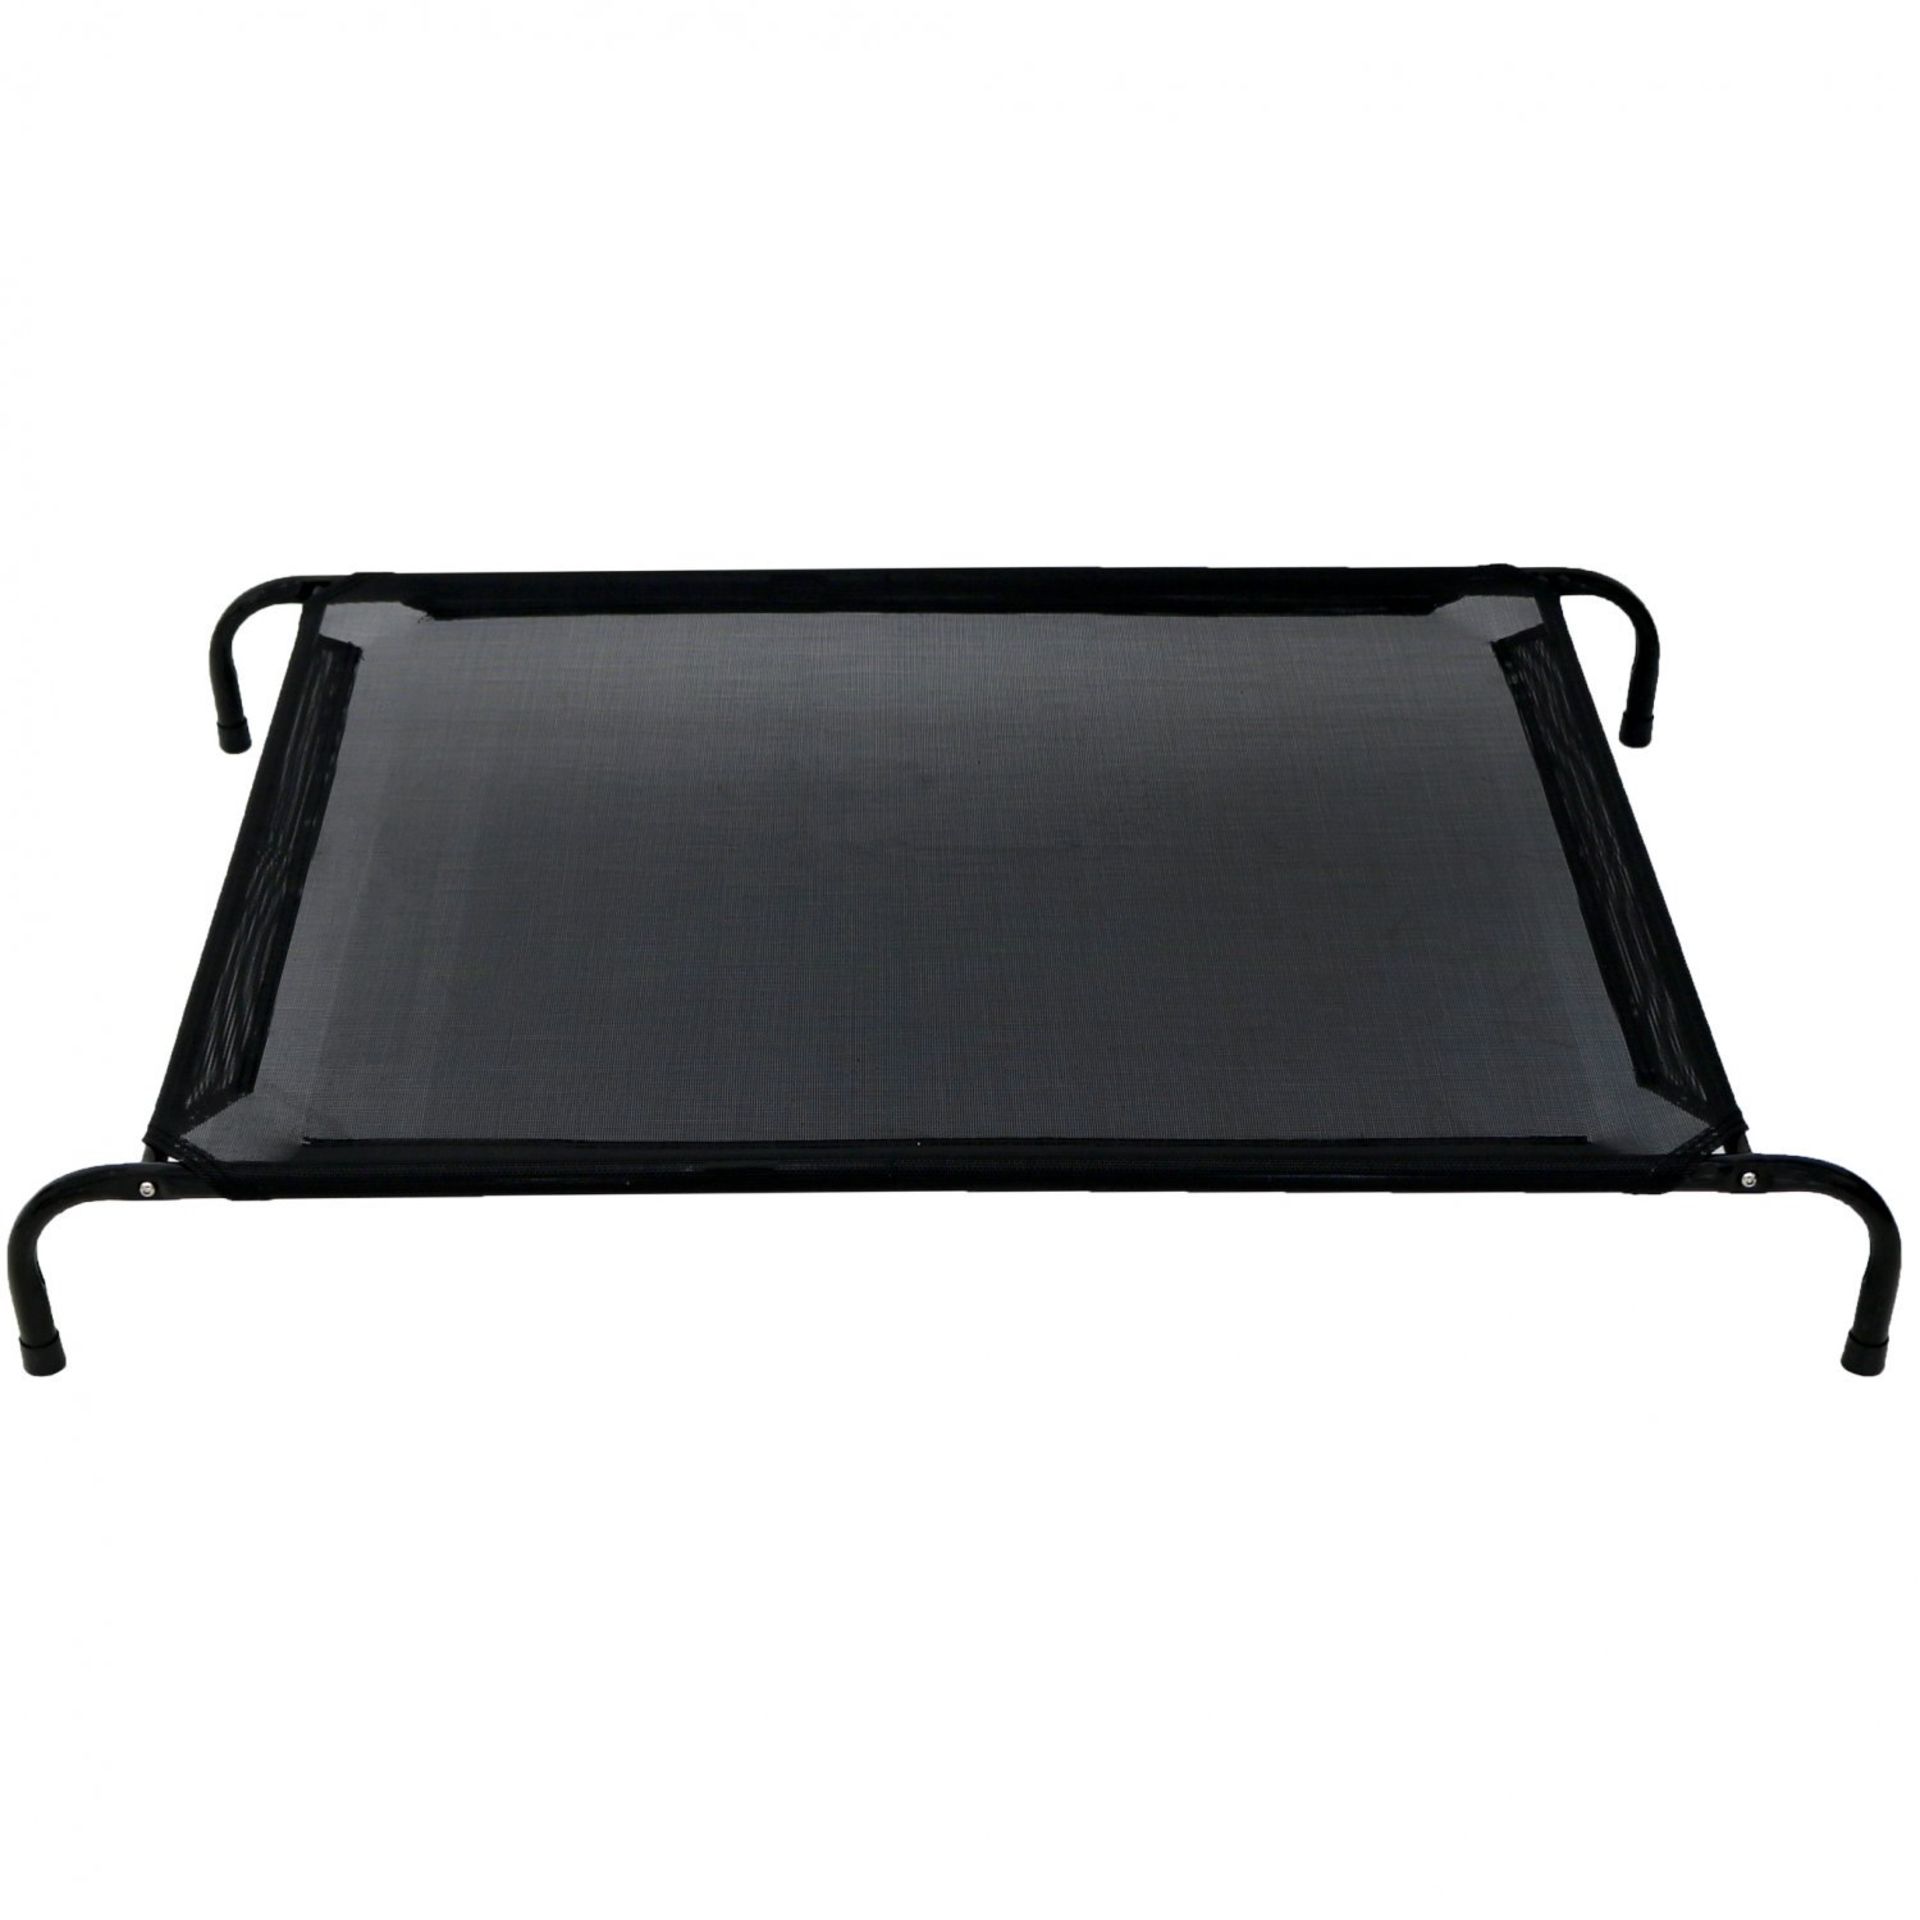 (RL34) Large Elevated Raised Dog Cat Pet Bed Cot Waterproof Portable The raised pet bed is t... - Image 2 of 2